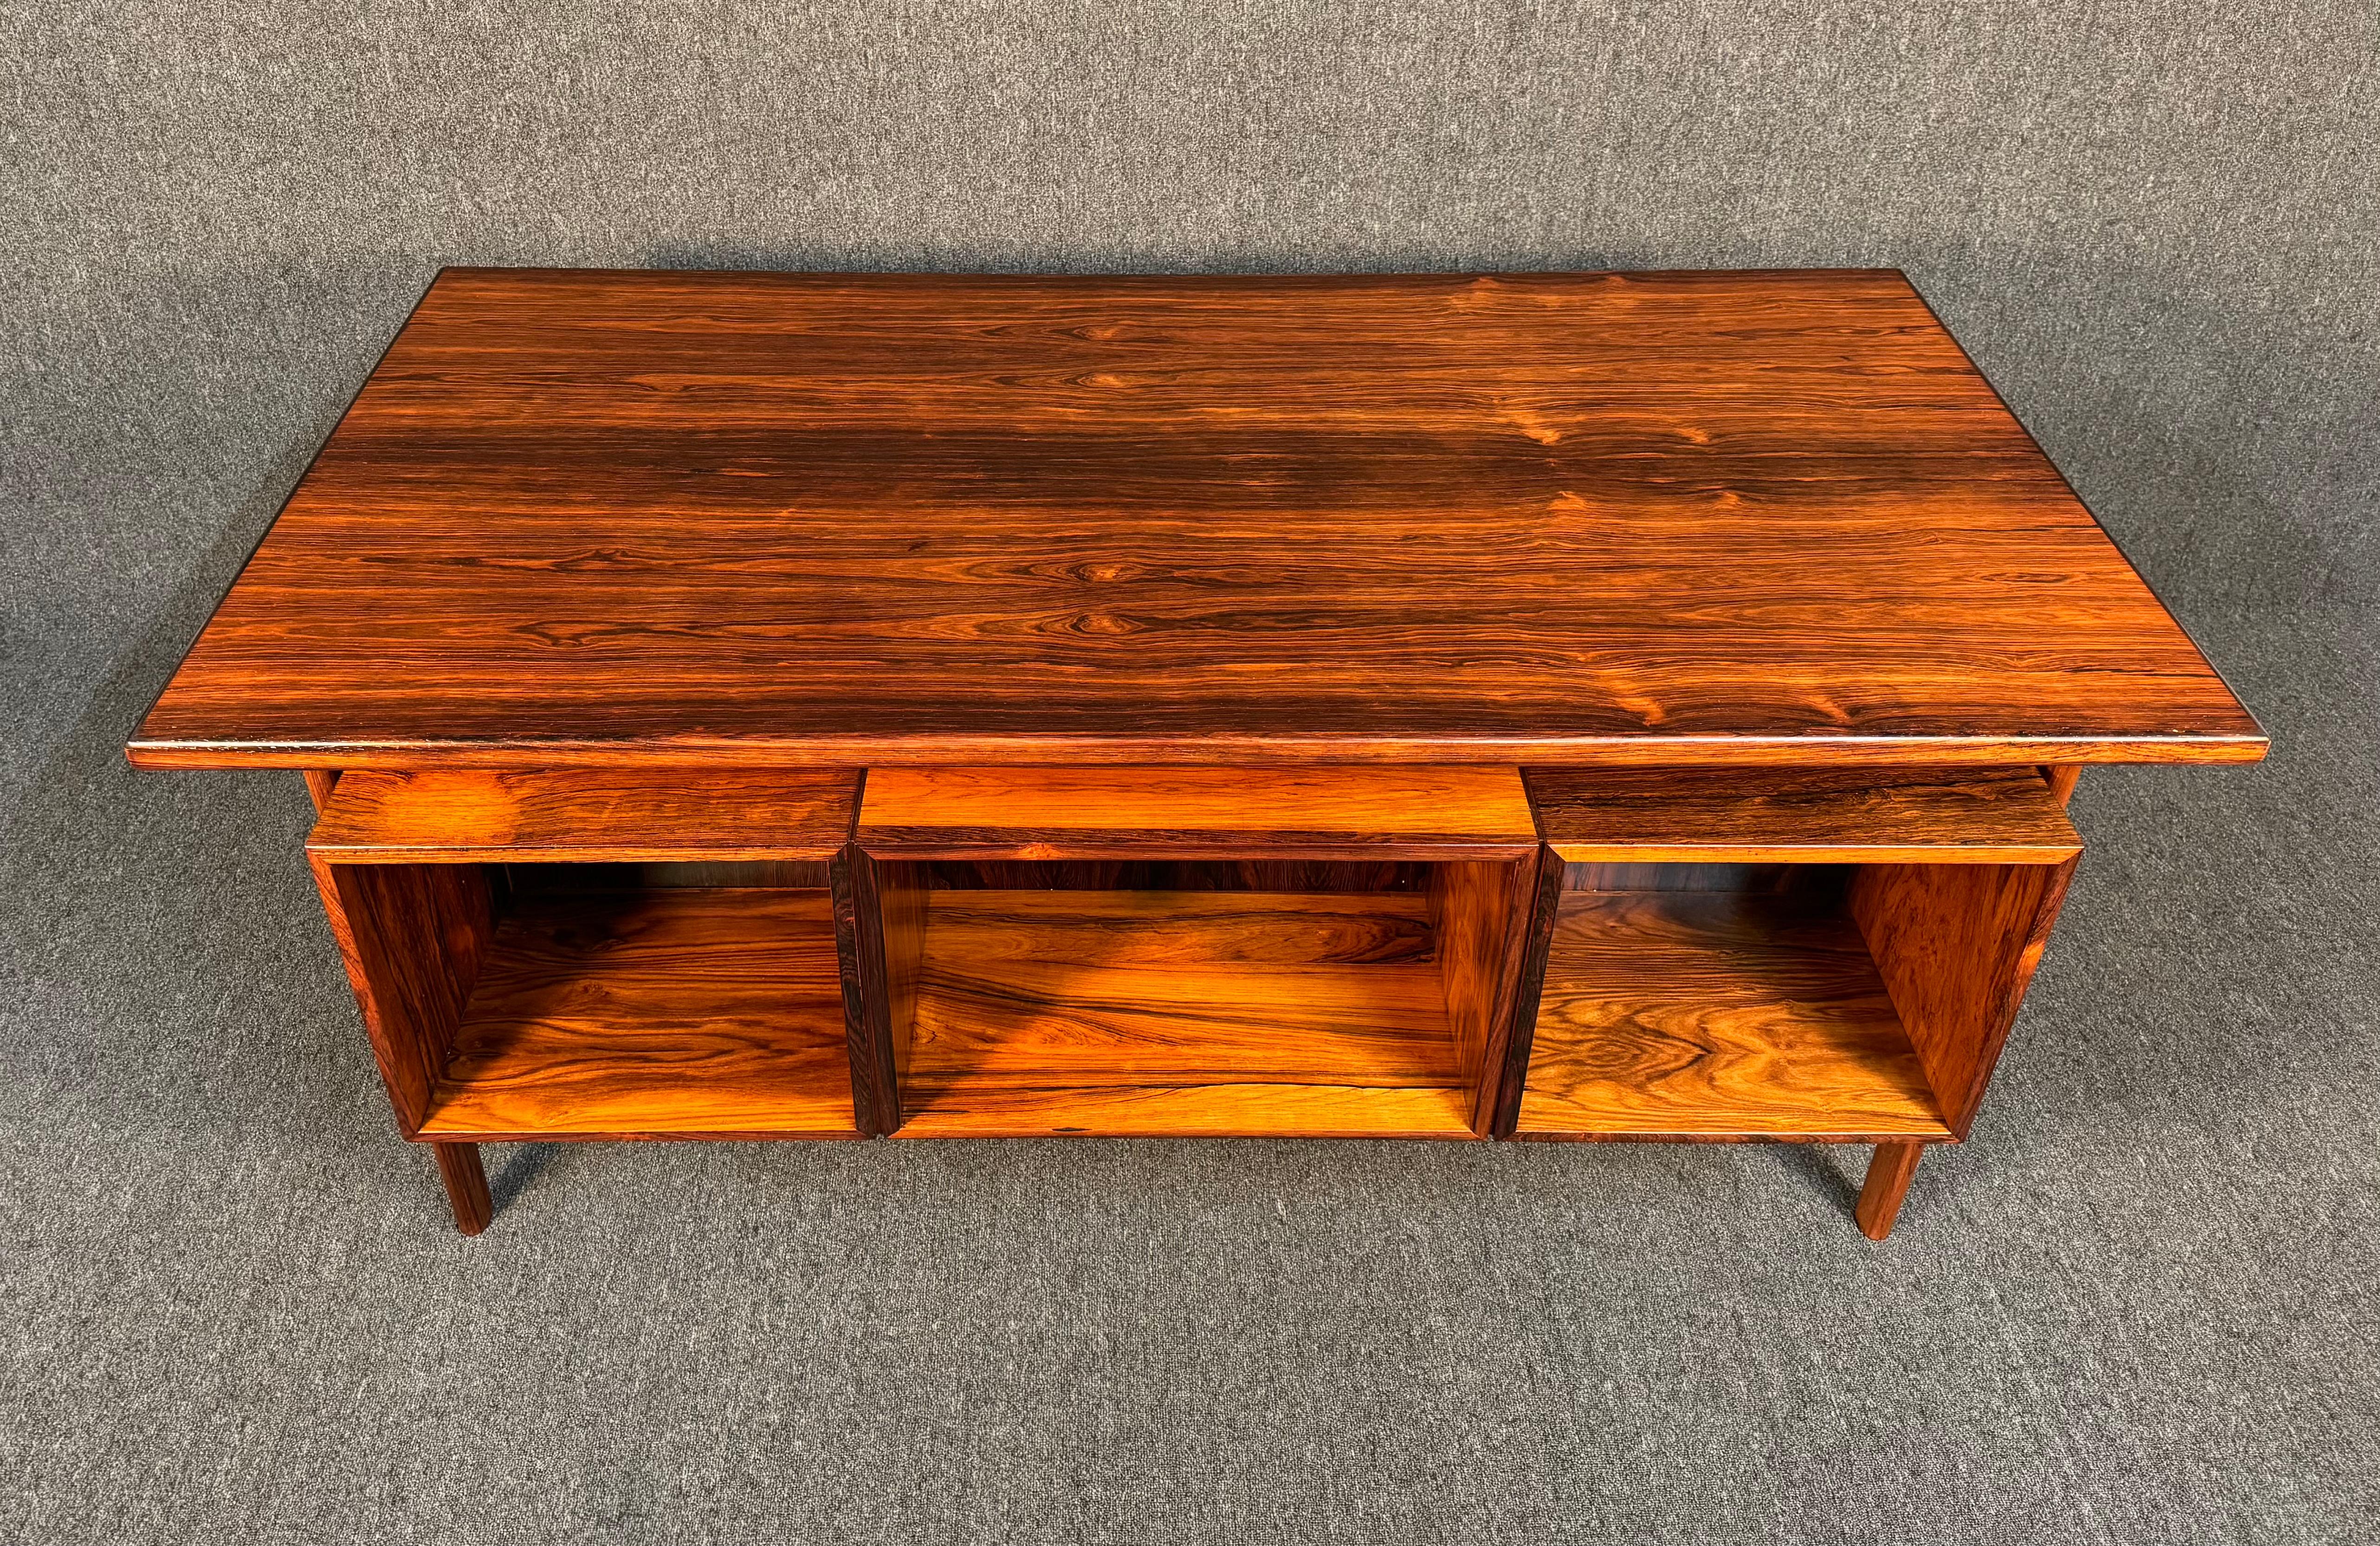 Vintage Danish Mid Century Modern Rosewood Floating Desk Fm50 by Kai Kristiansen In Good Condition For Sale In San Marcos, CA